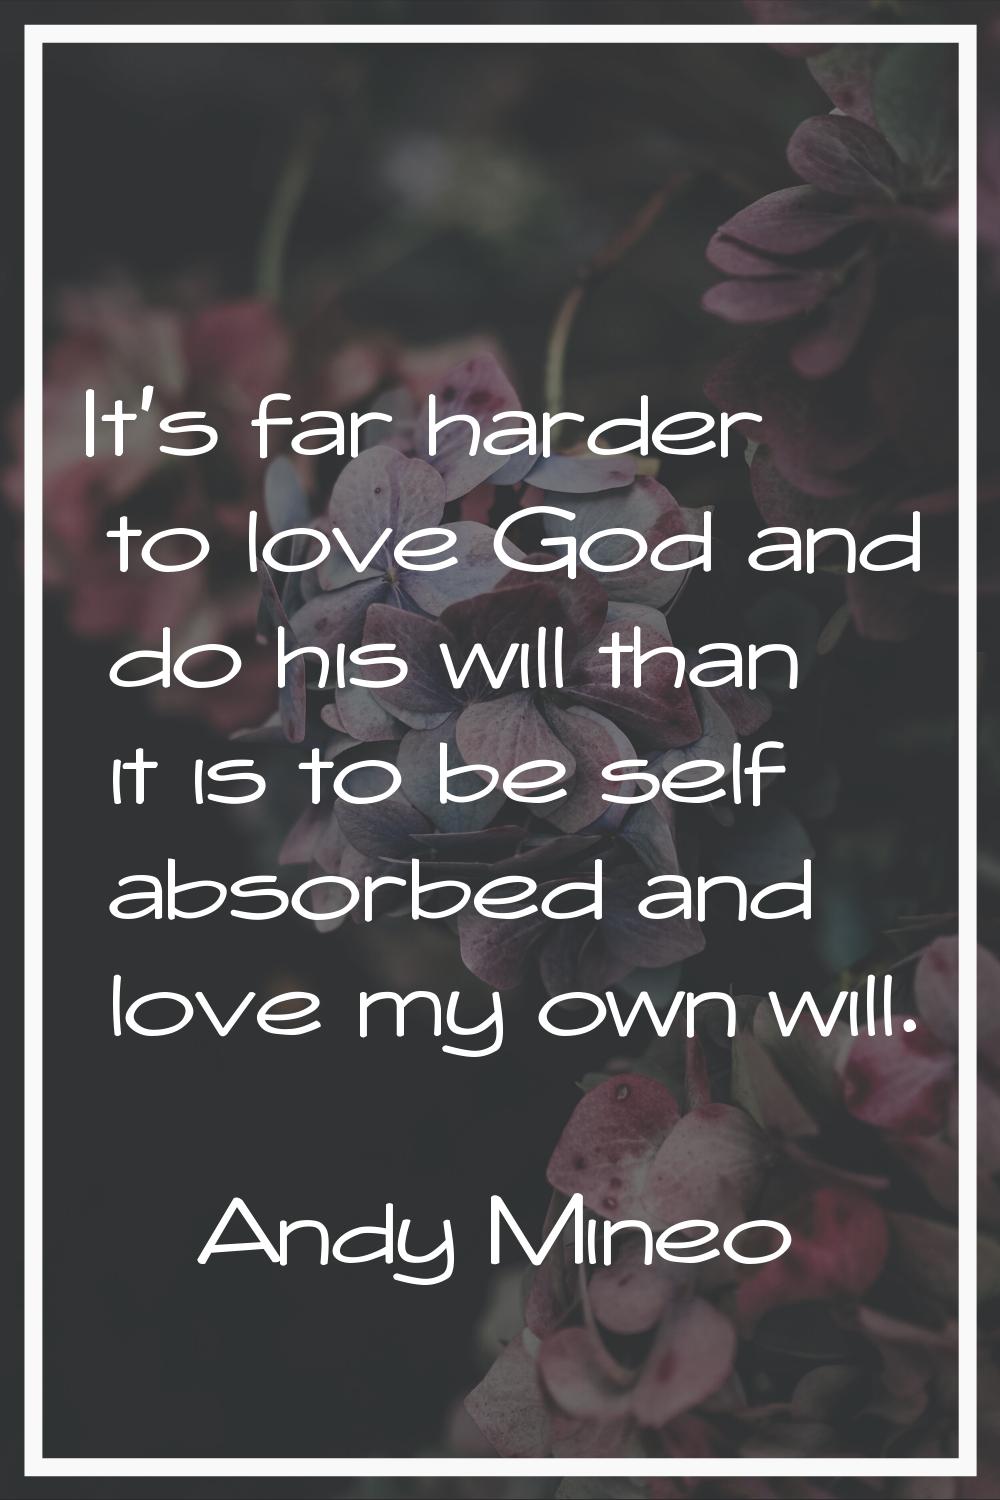 It's far harder to love God and do his will than it is to be self absorbed and love my own will.